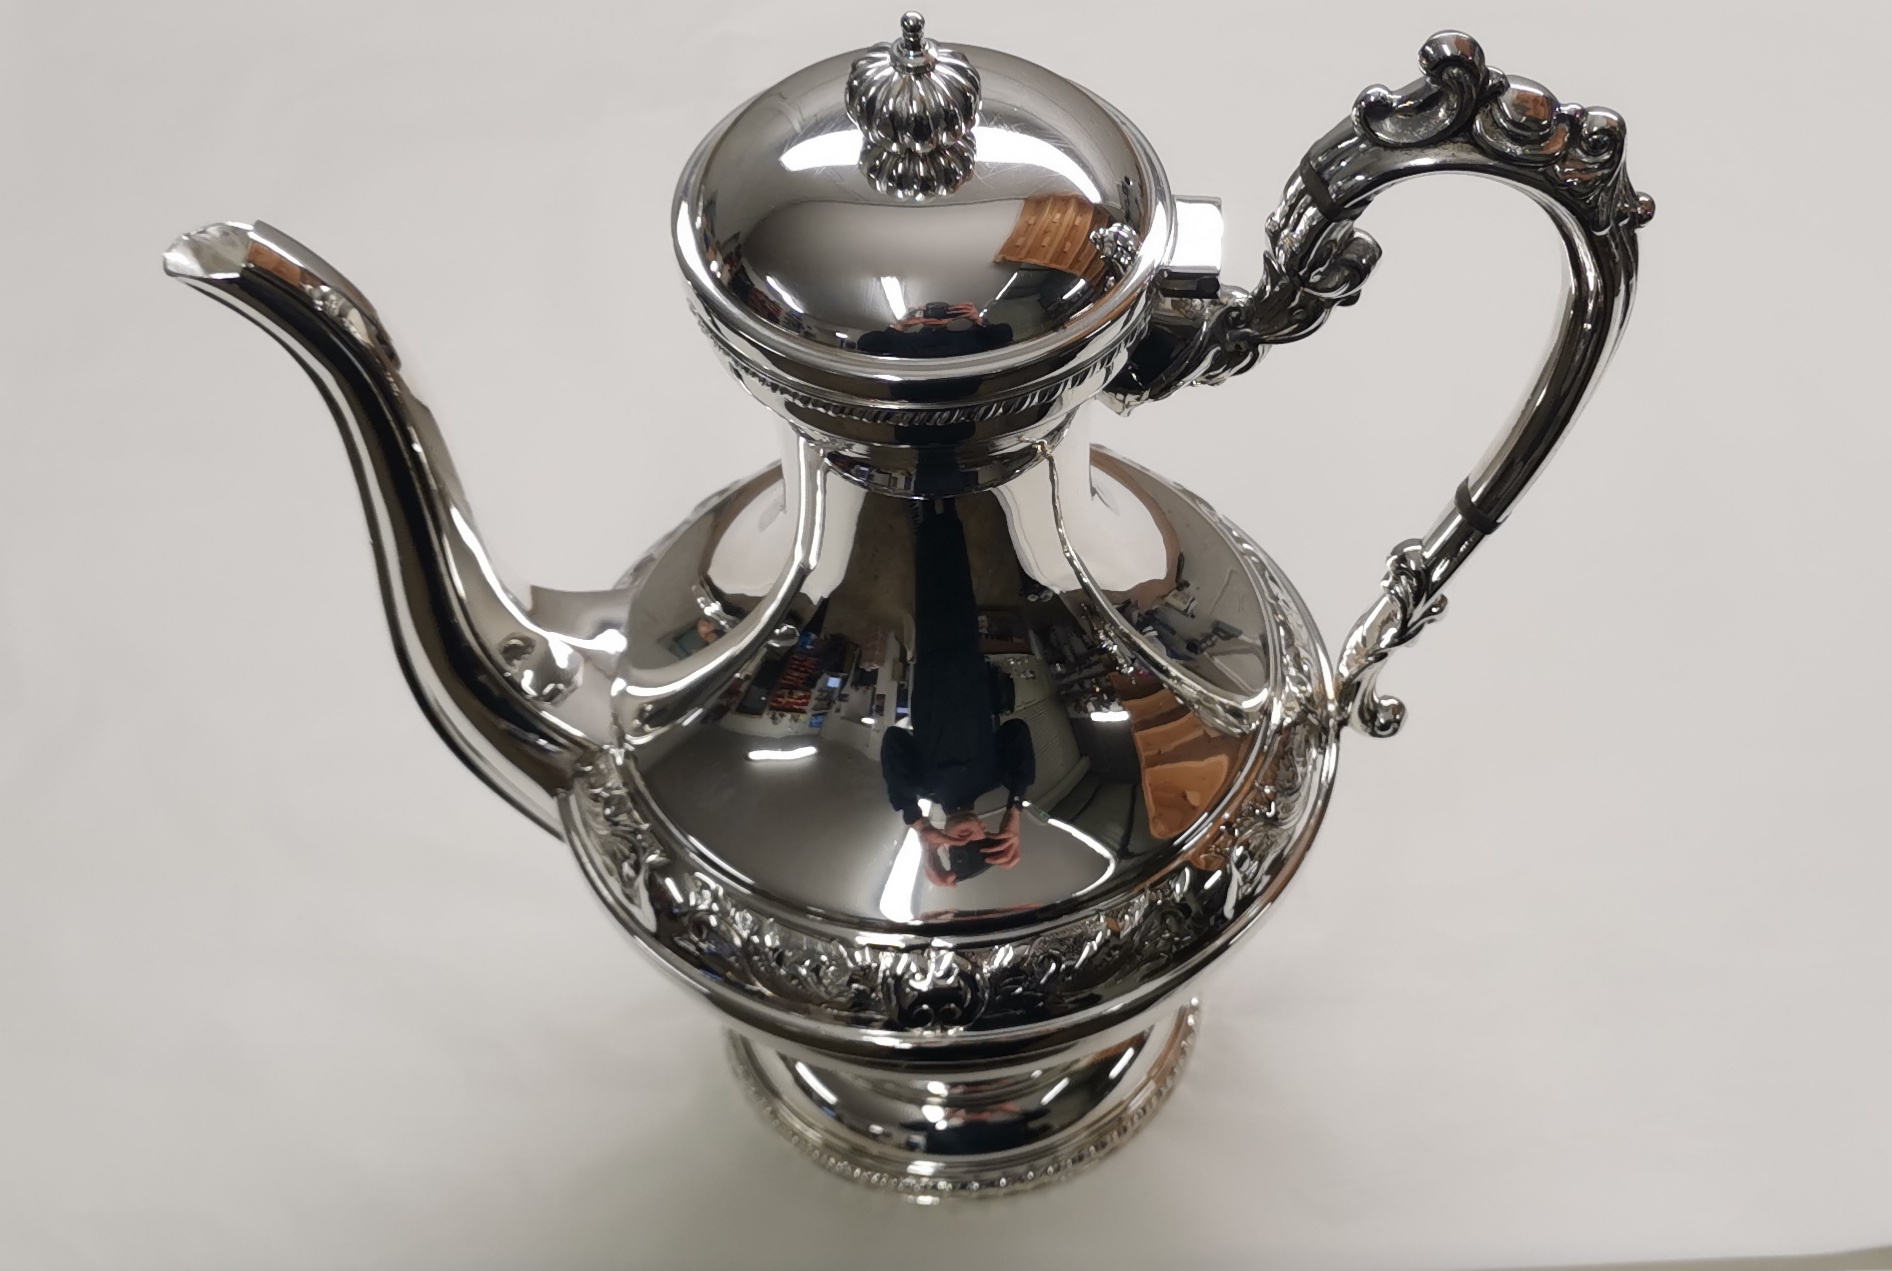 Silver Vintage Coffee Pot - all come in various designs and sizes